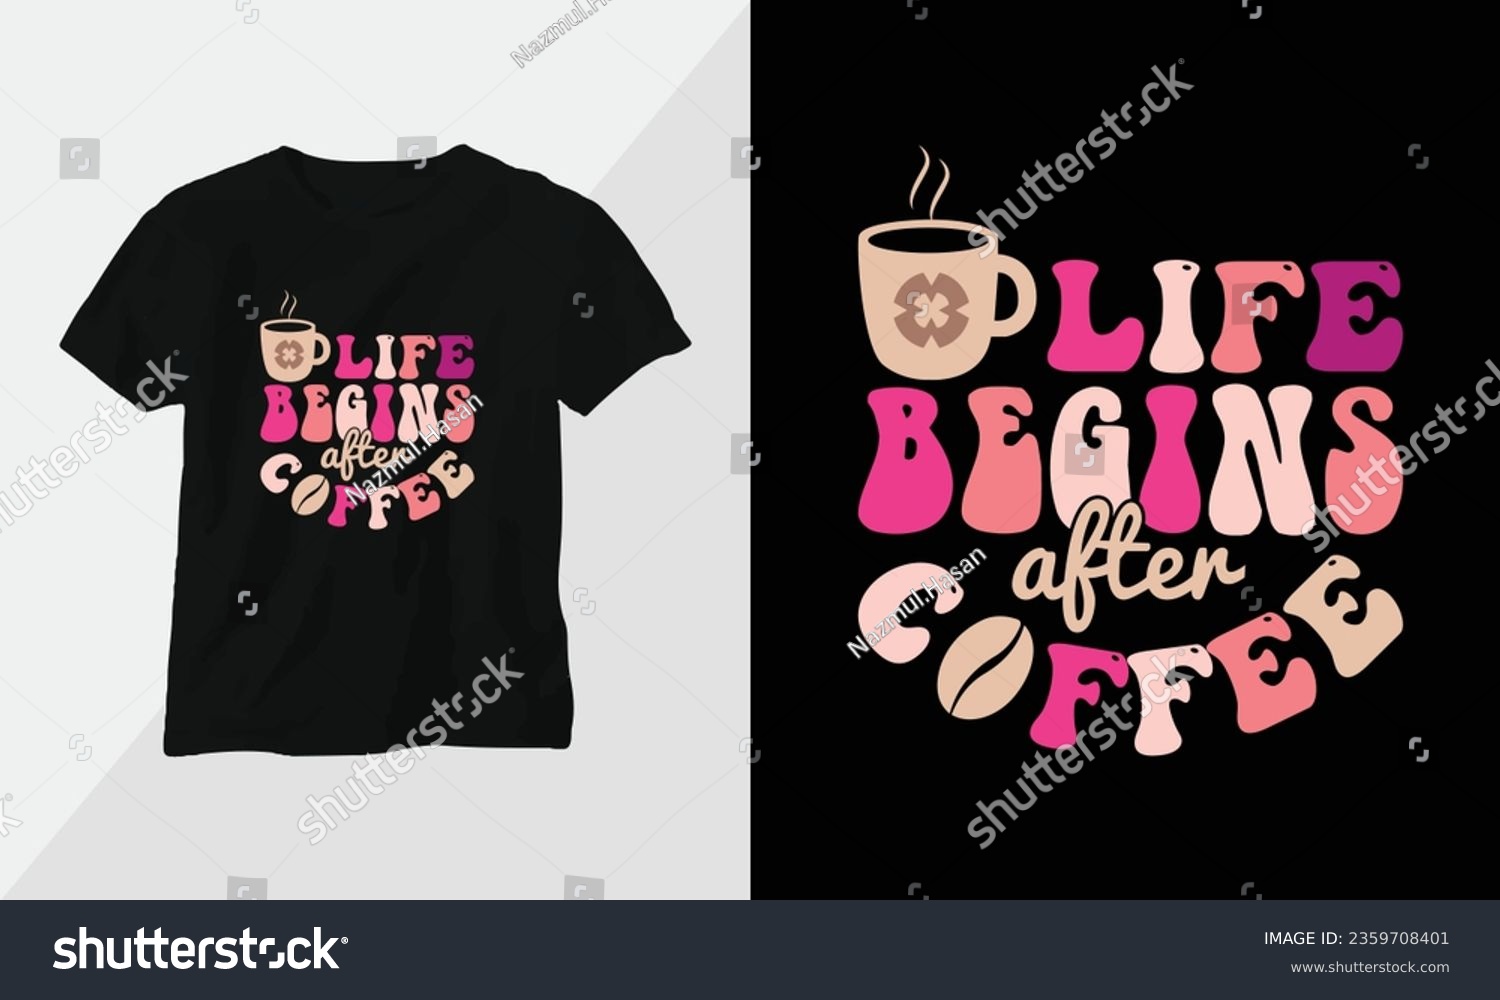 SVG of Life begins after coffee - Retro Groovy Inspirational T-shirt Design with retro style svg